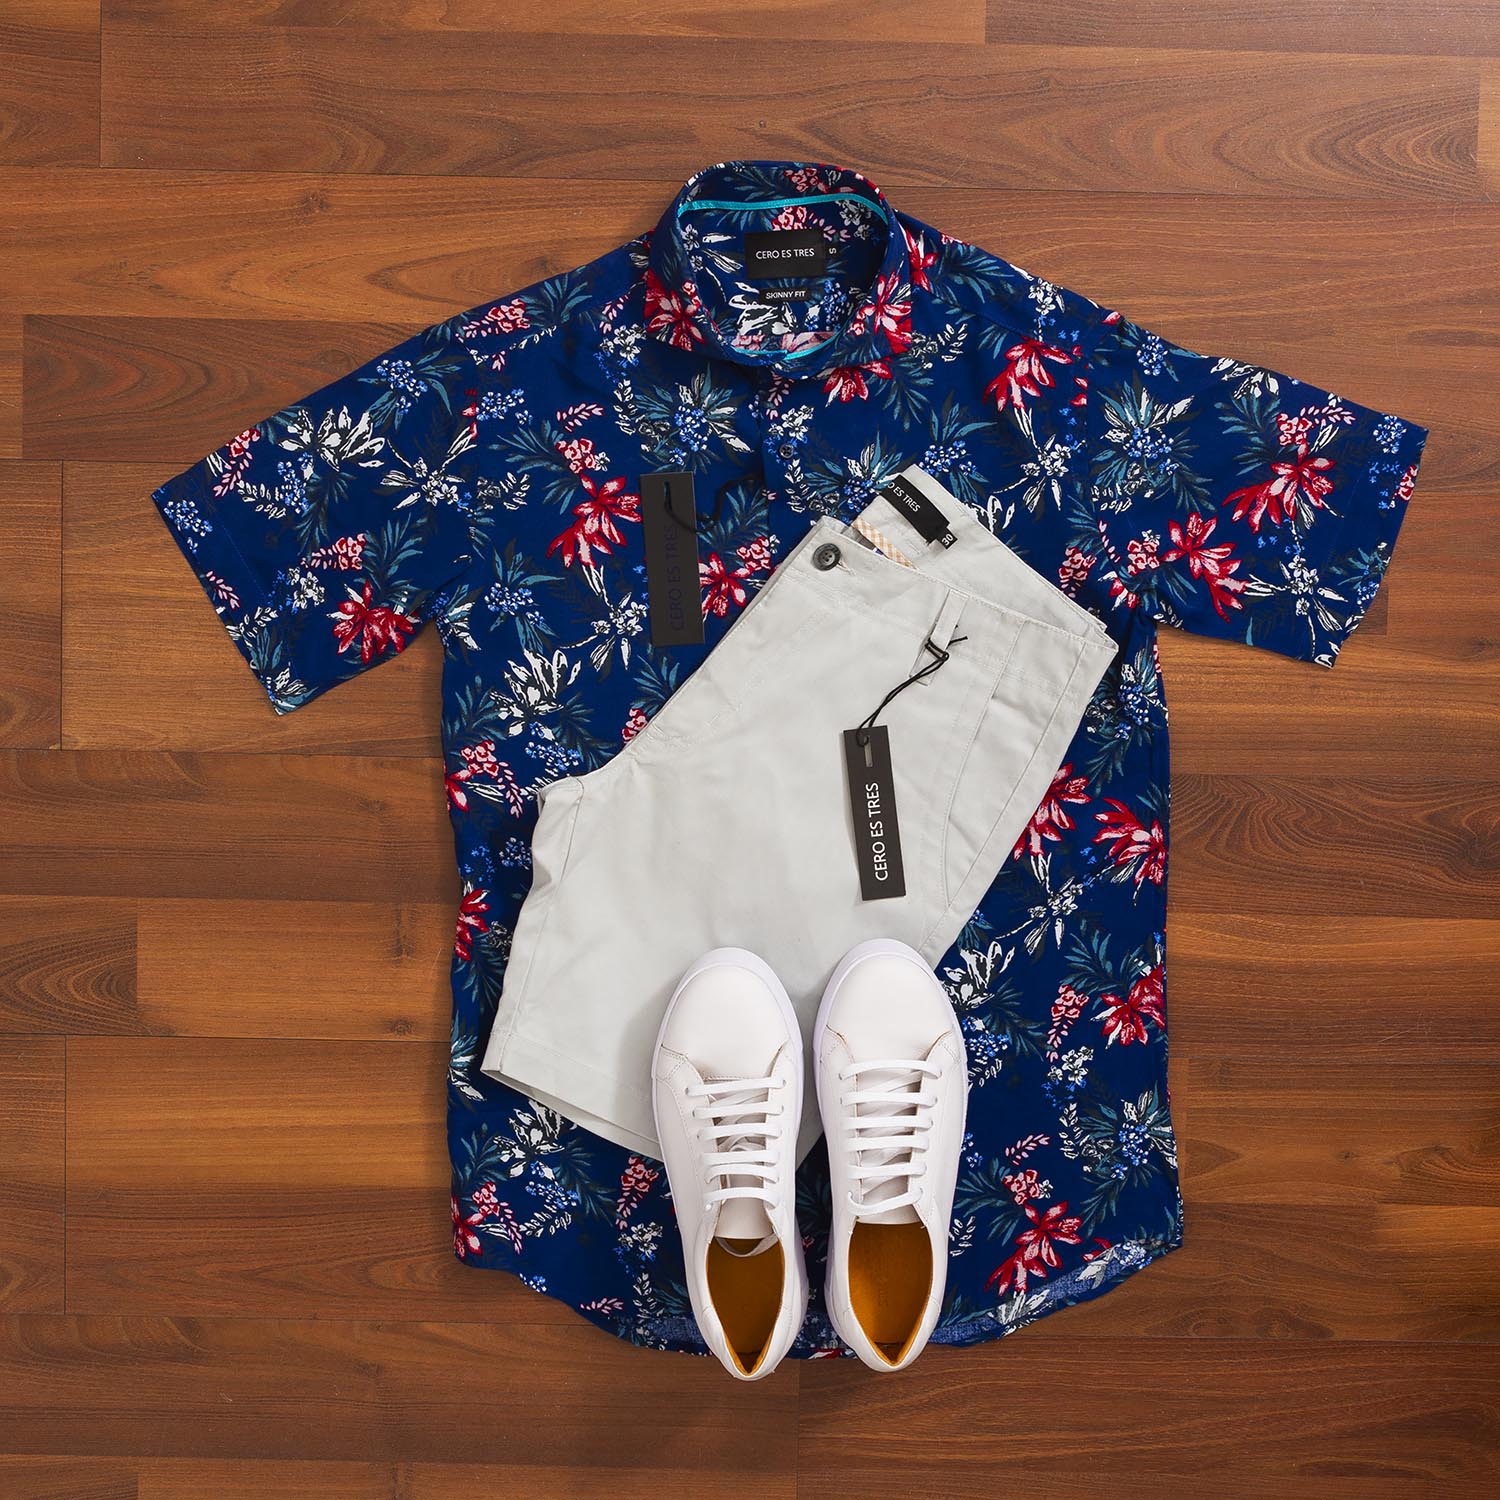 OUTFIT CERO 422